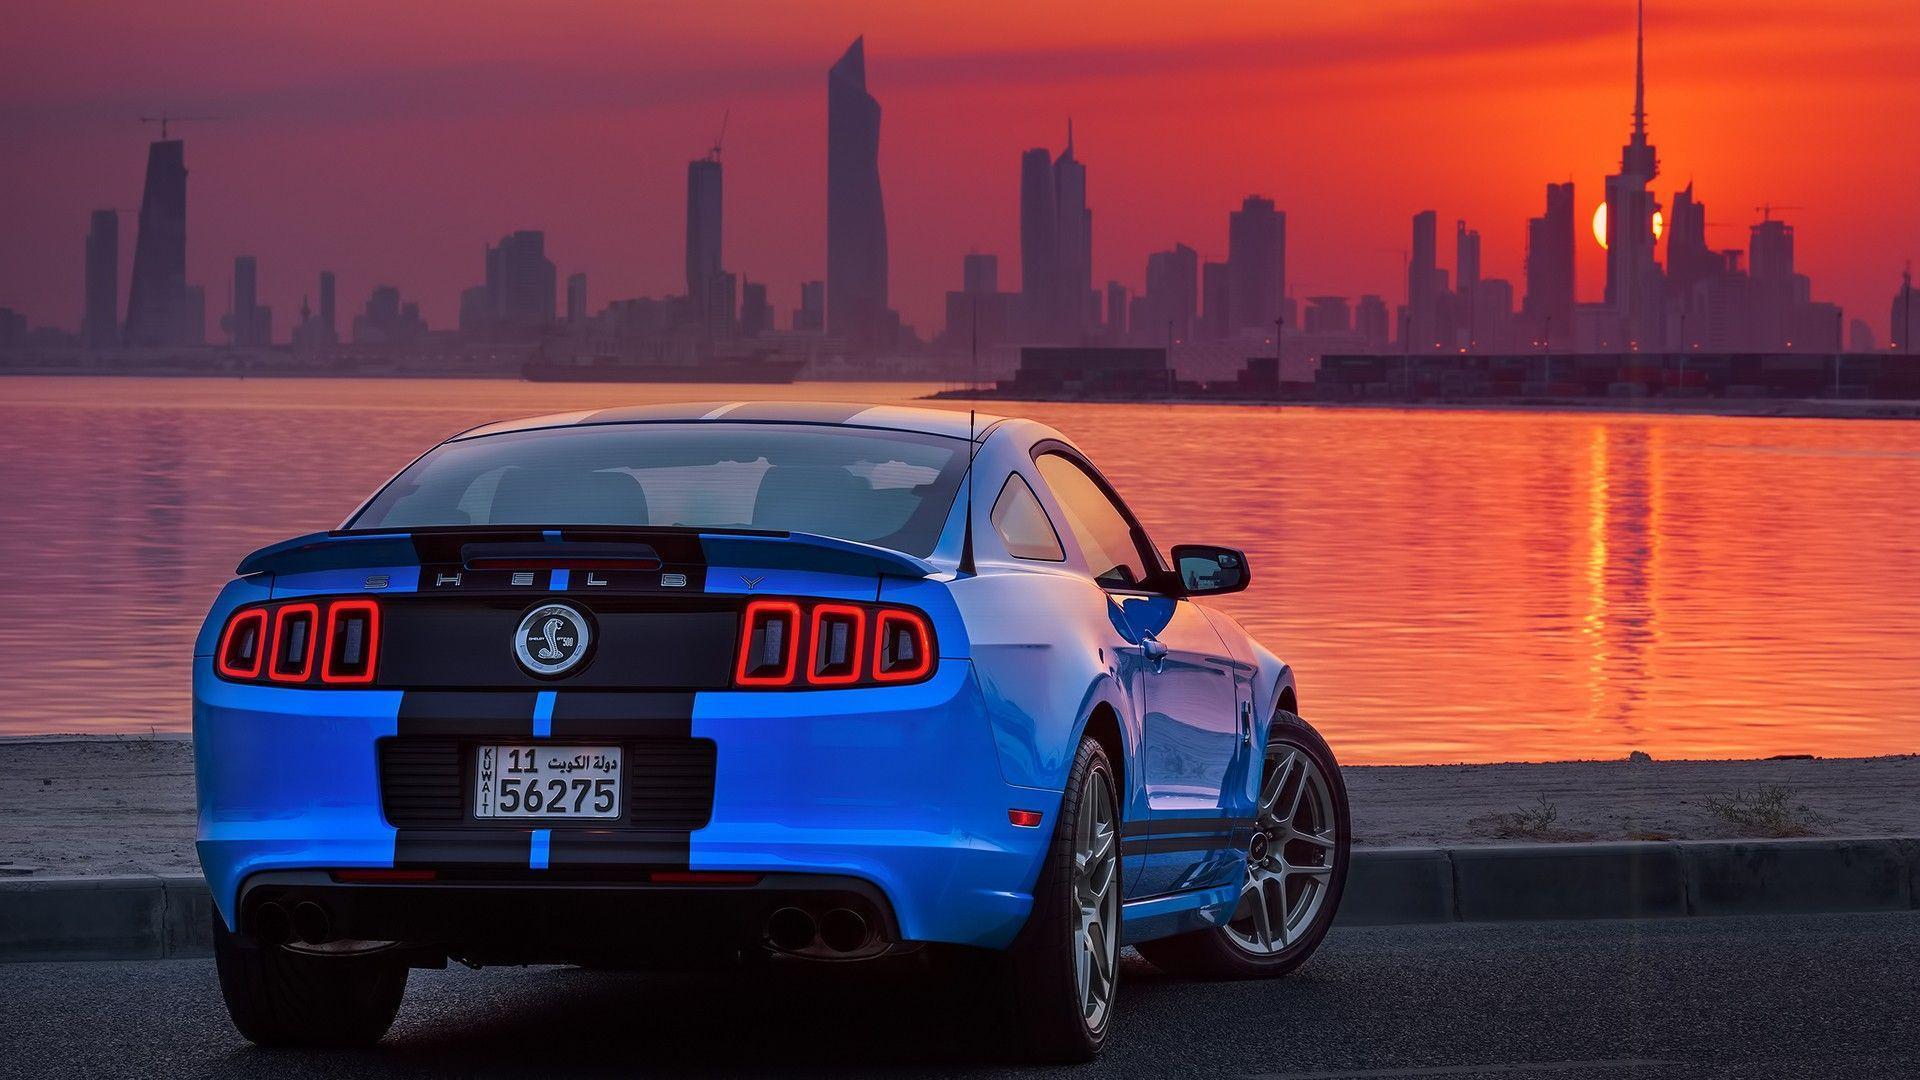 Shelby GT, Ford USA, Car, Ford Mustang Shelby, Sunrise, Kuwait